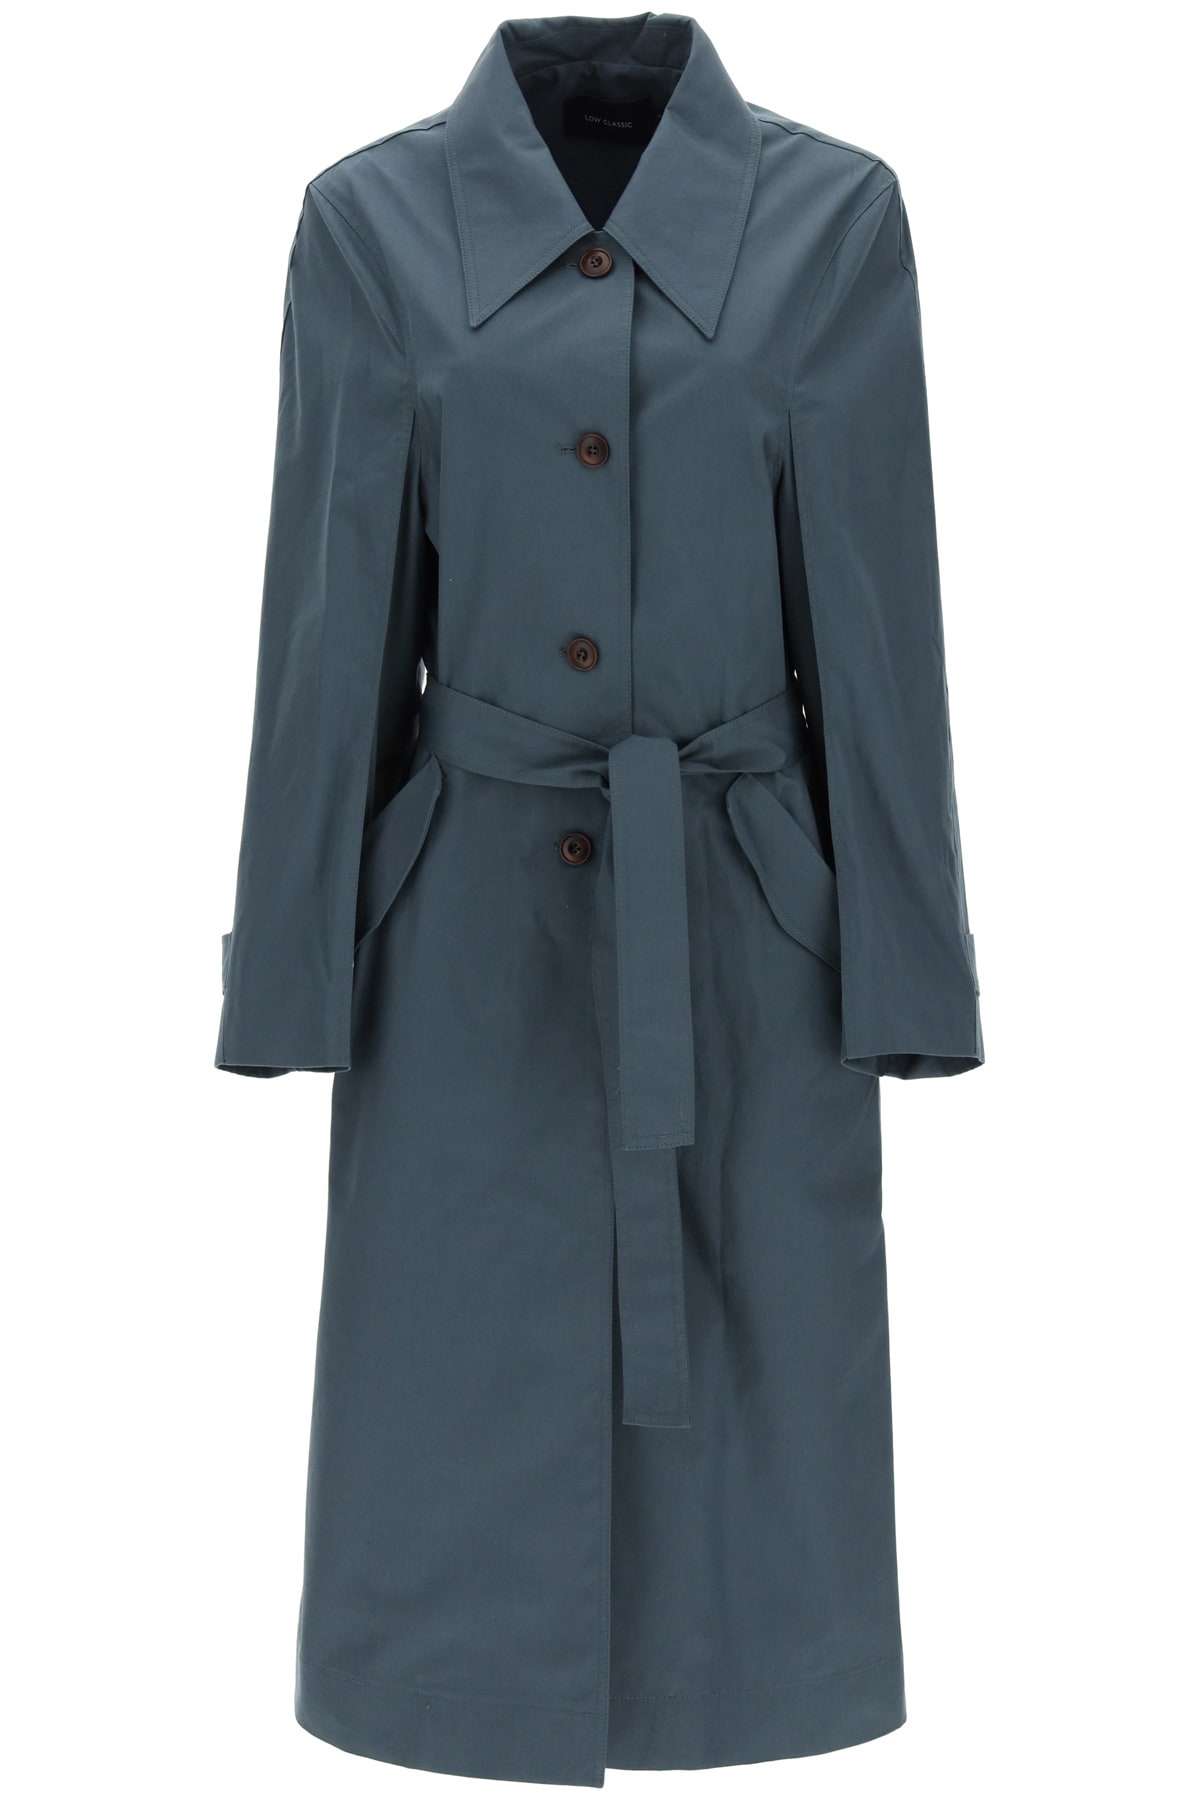 Low Classic Cotton Trench Coat